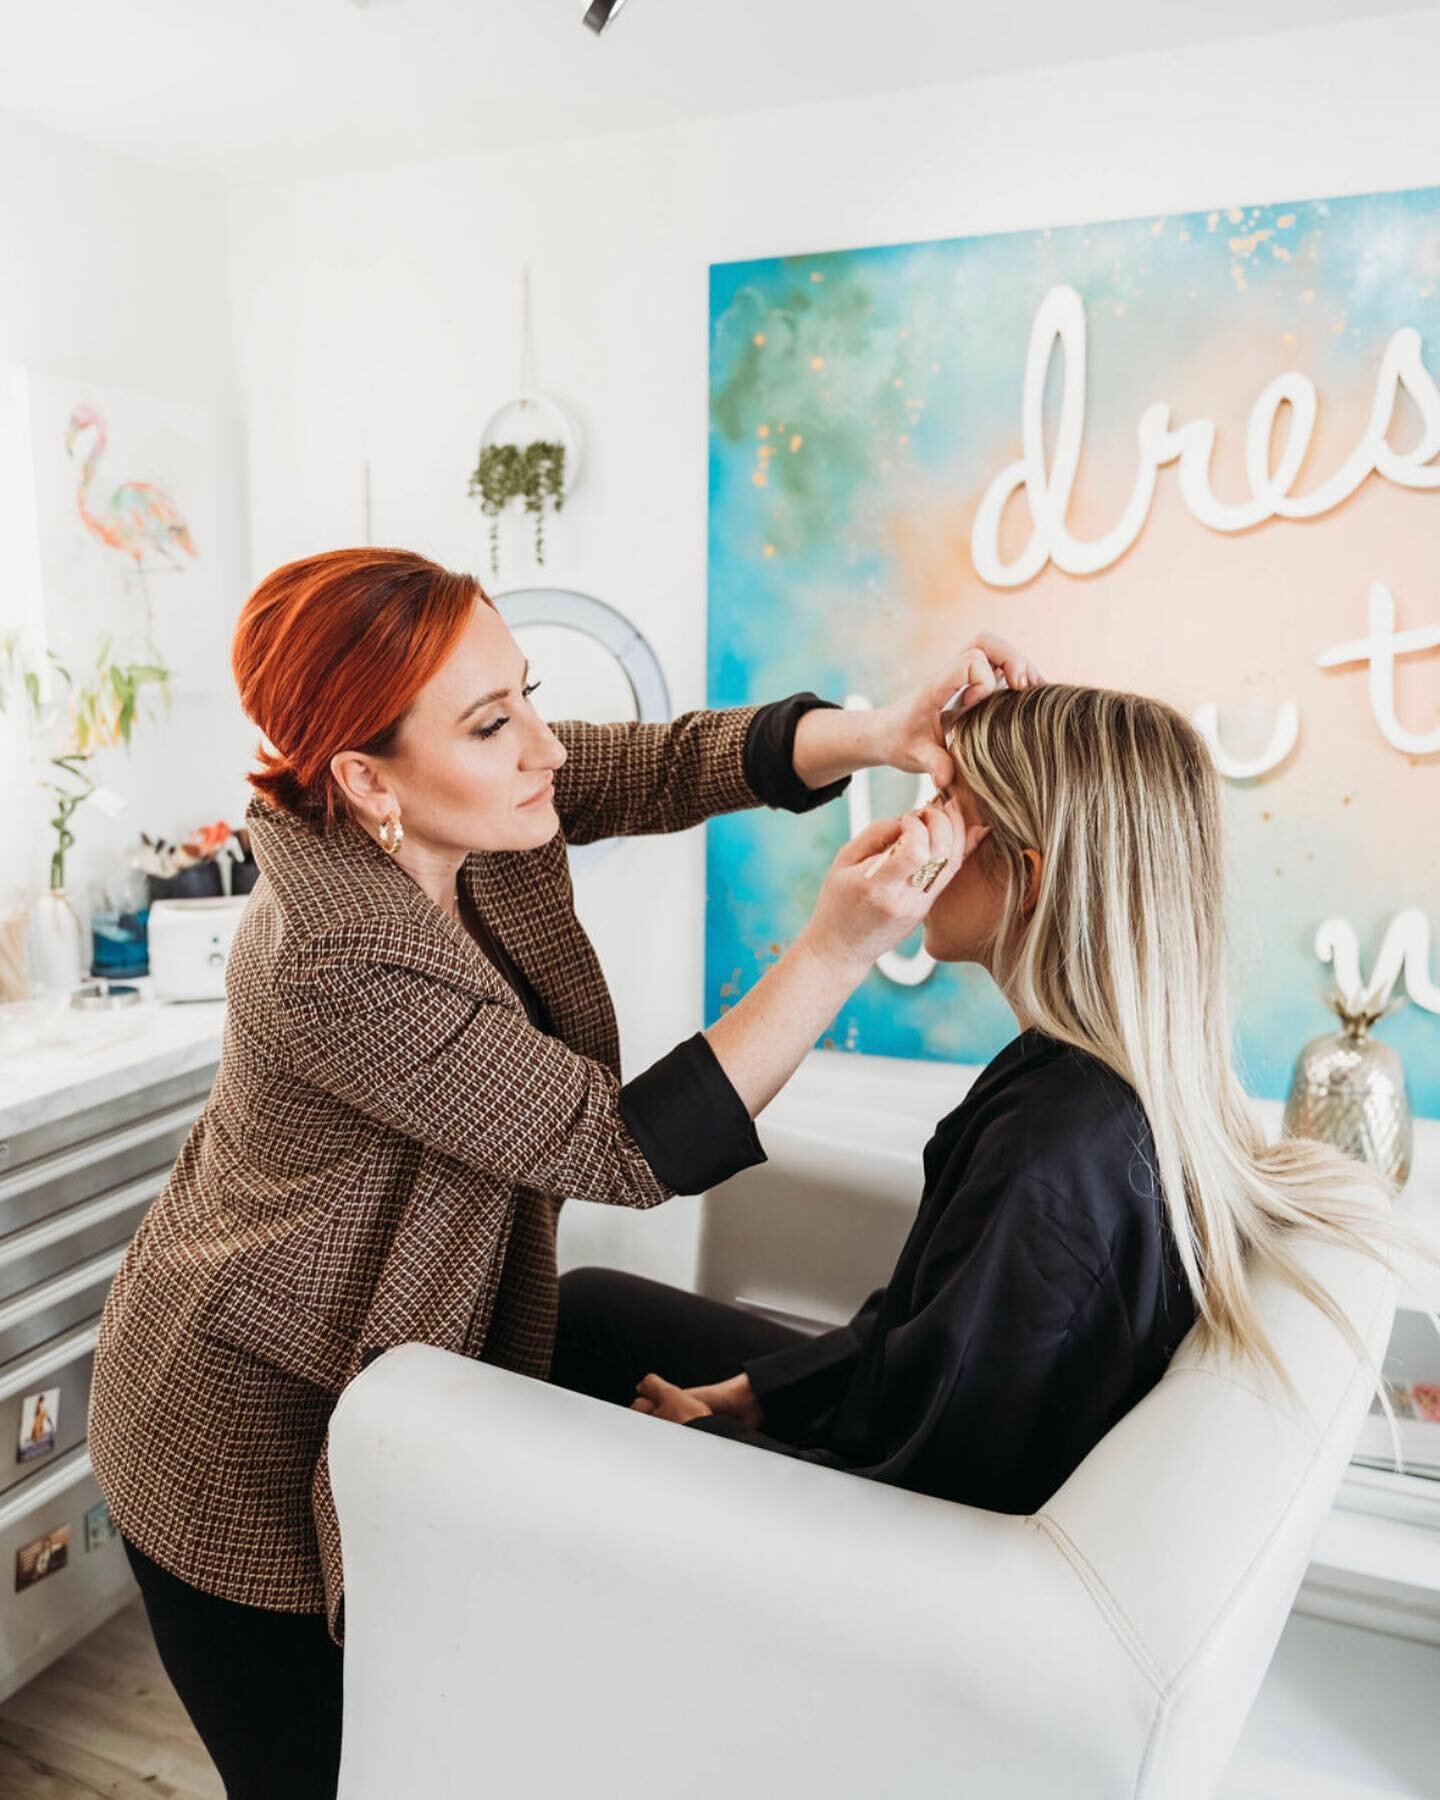 Happy Monday!!! Who has an appointment with us this week?!? &hearts;️Can&rsquo;t wait to see your beautiful faces!!!! 🥰
.
Photo by @hey.its.me.amber 
.
#wedding #Earthlybeauty #earthlybeautybar #cda #cdaidaho #idaho #idahome #idahostylist #hair #sal